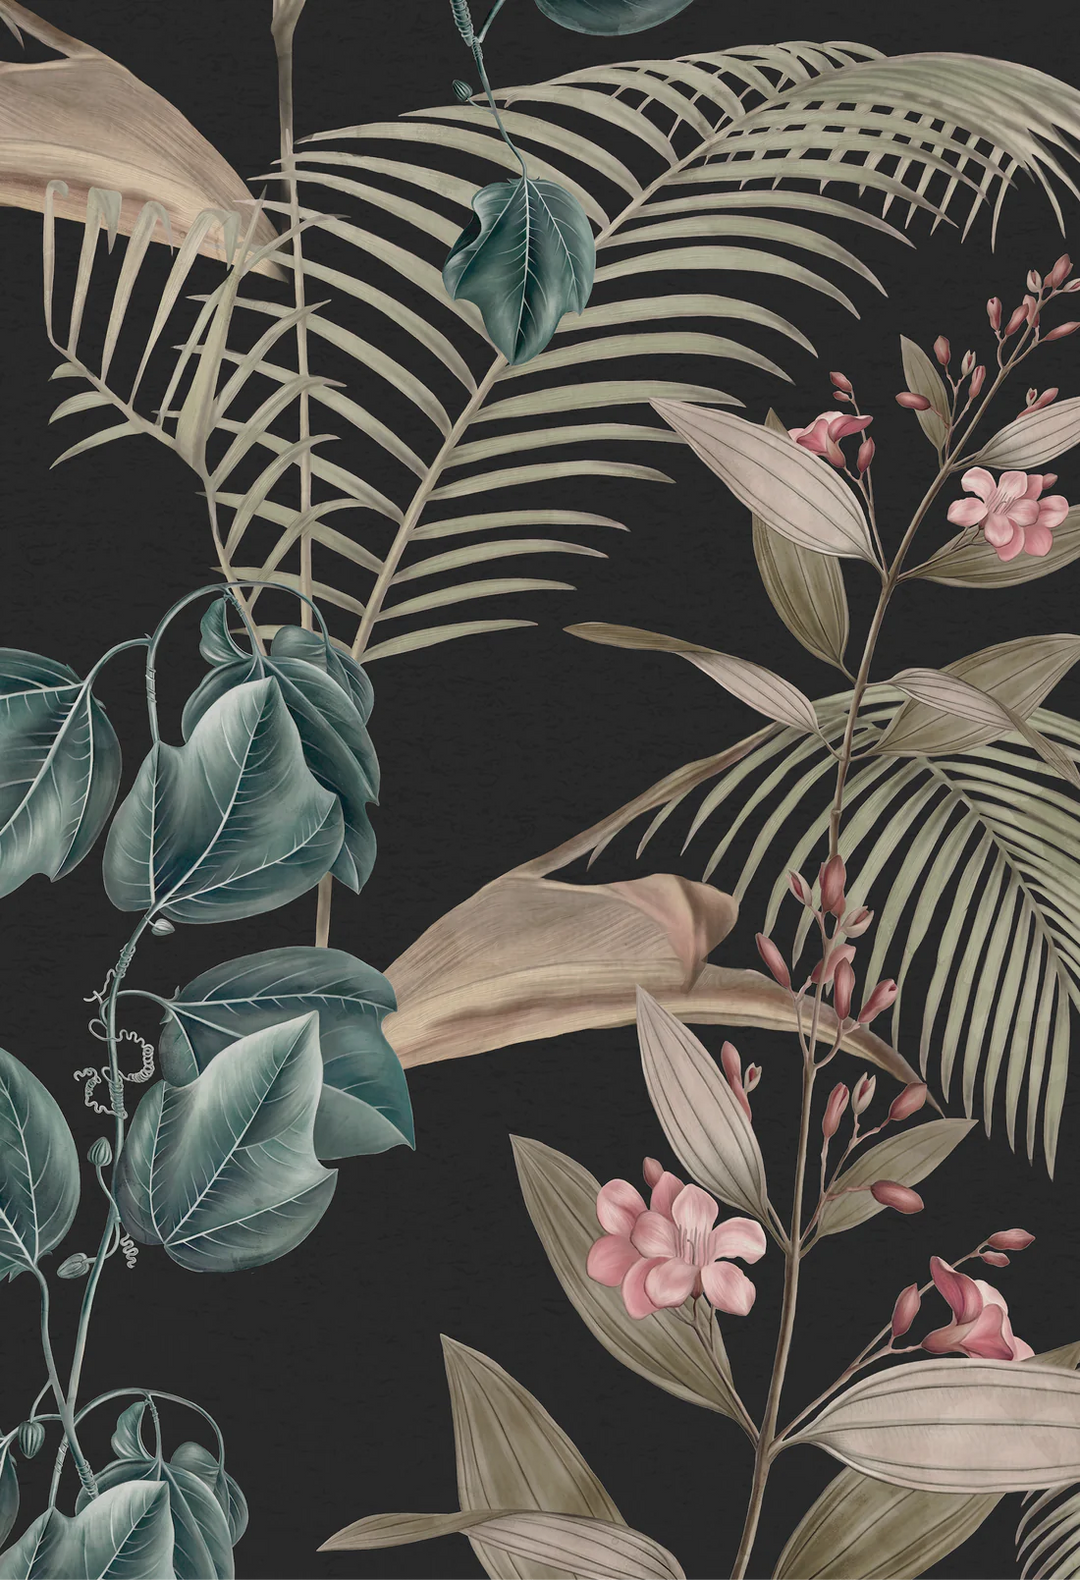 Deus-ex-Gardenia-Wild-Ivy-Dusk-black-background-green--wild-palm-spider-monkey-leaves-South-American-Paradise-palm-leaves-jungle-pattern-hand-illustrated-pattern